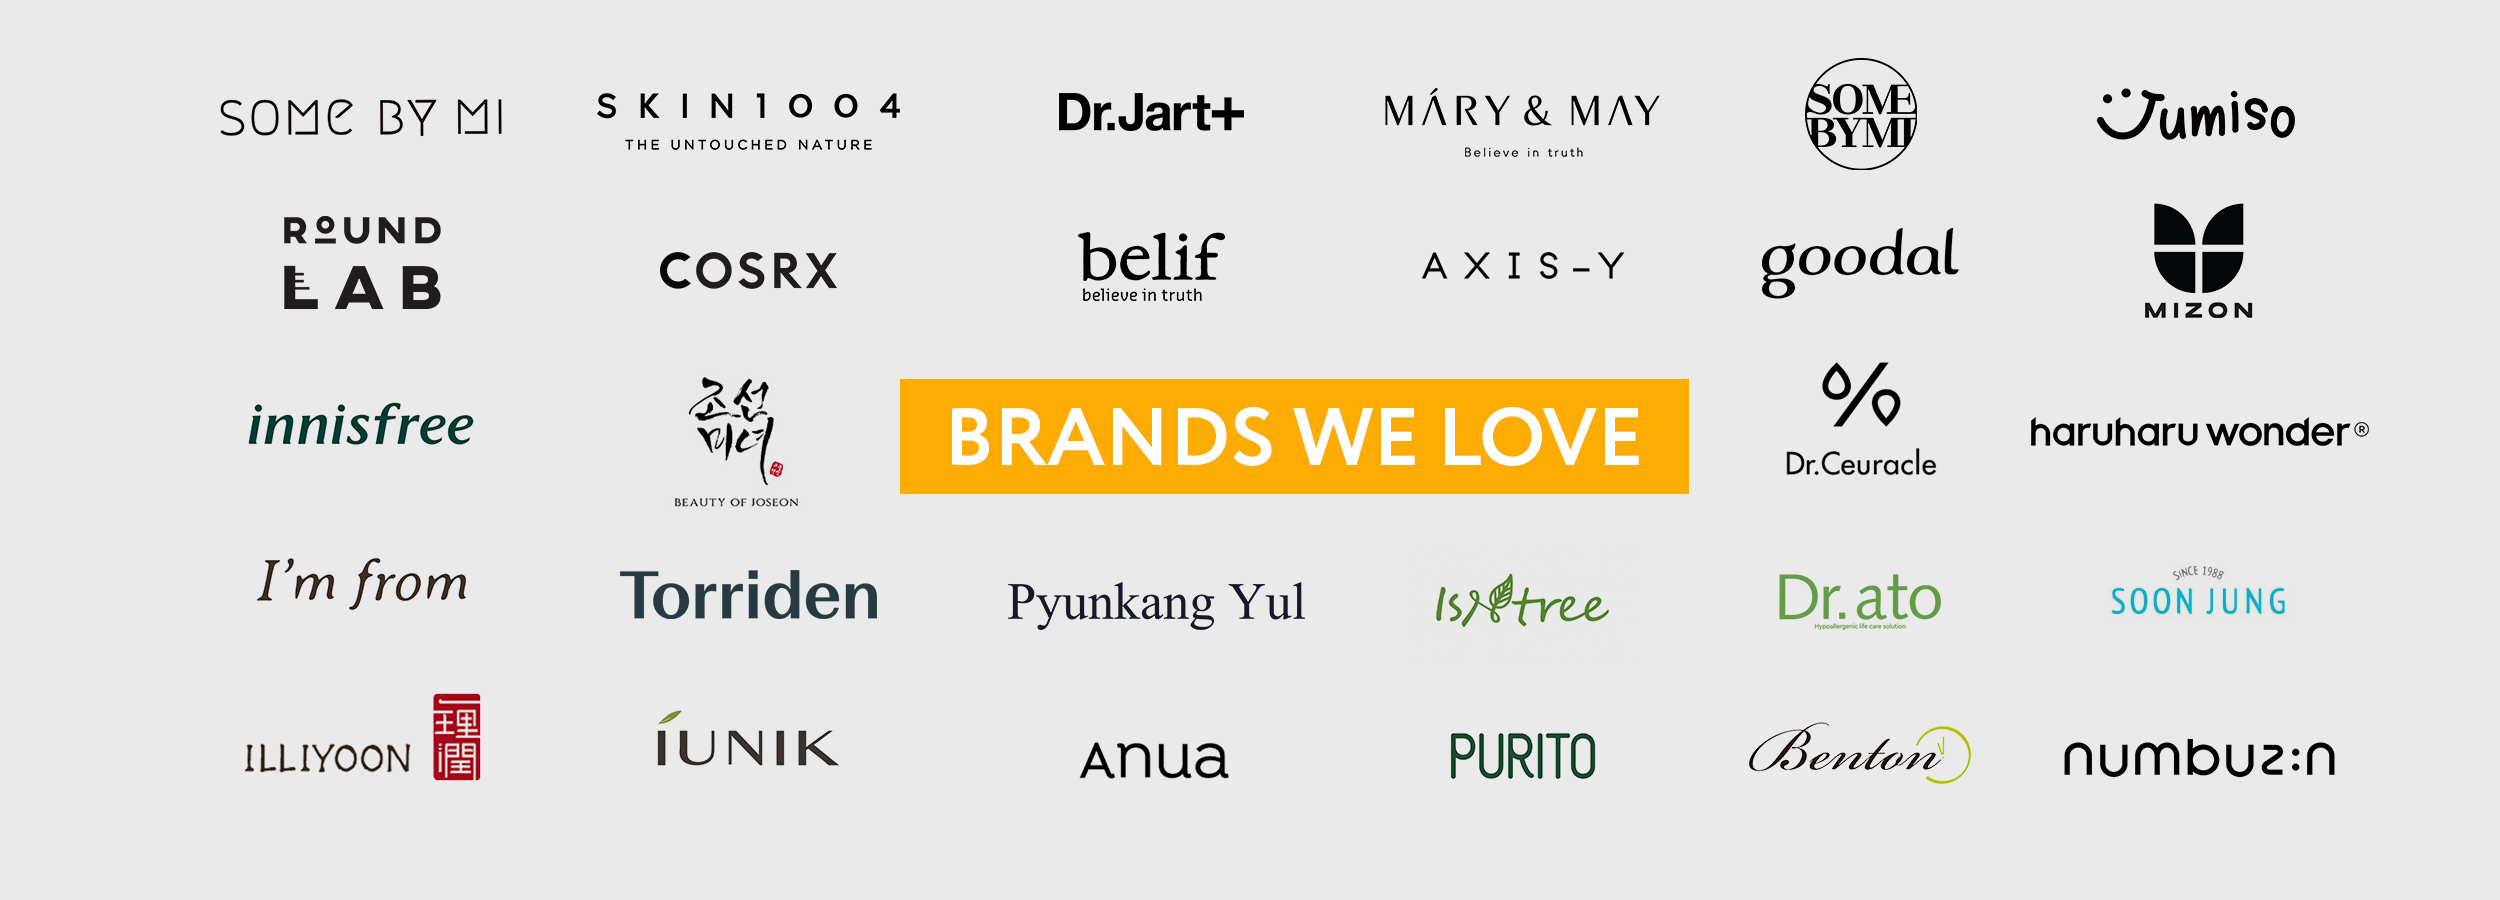 List of various K-Beauty brand logos and "Brands We Love" mentioned at the center.